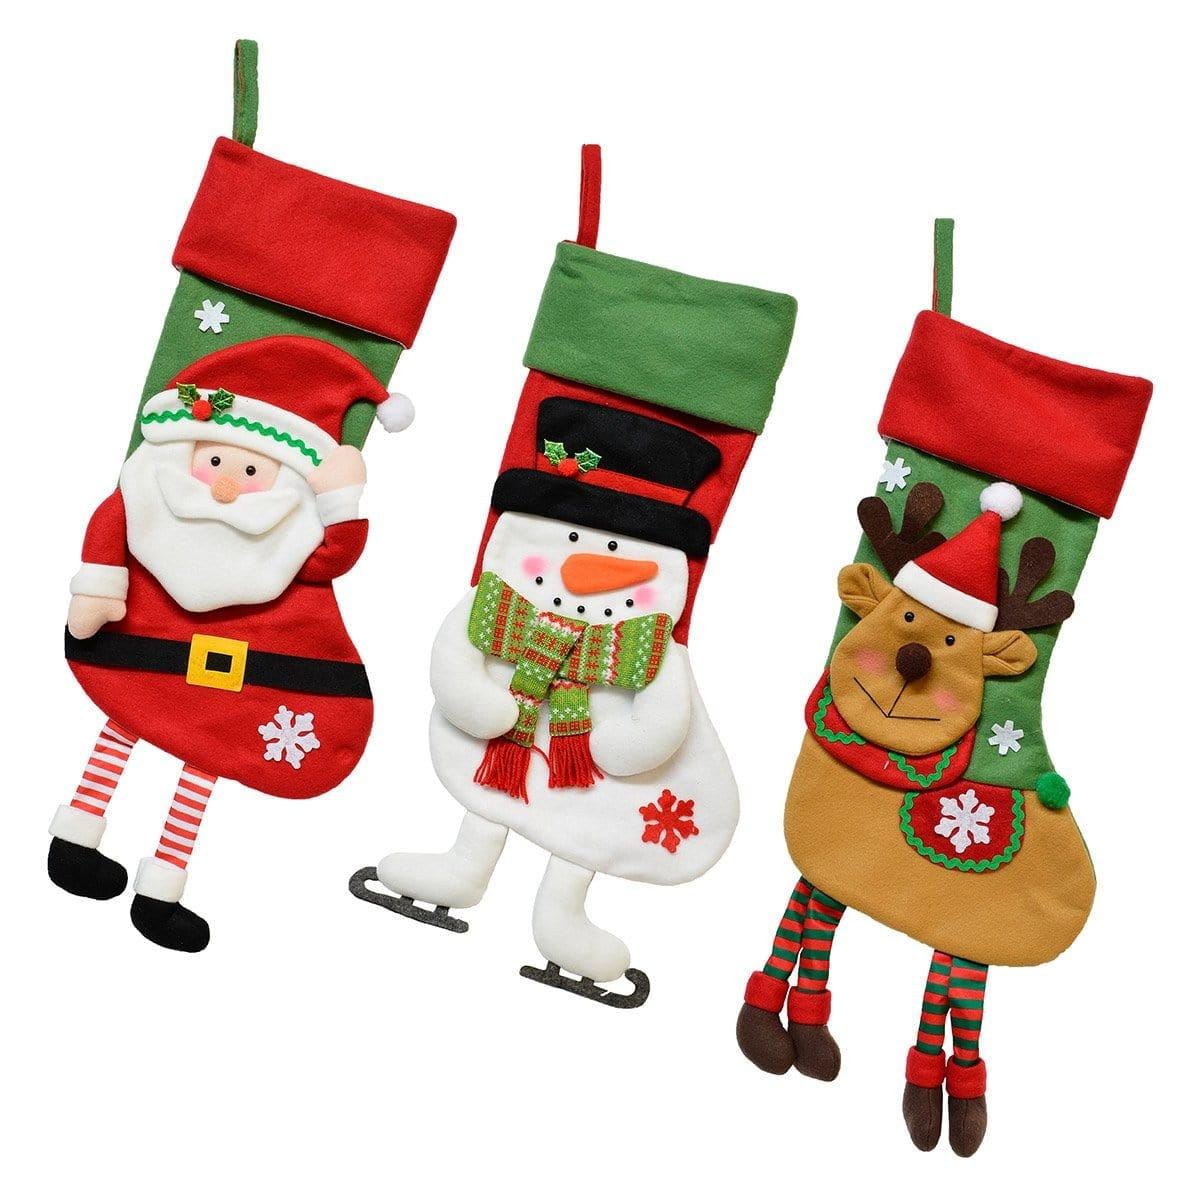 Buy Christmas Fabric Stocking Asst. sold at Party Expert